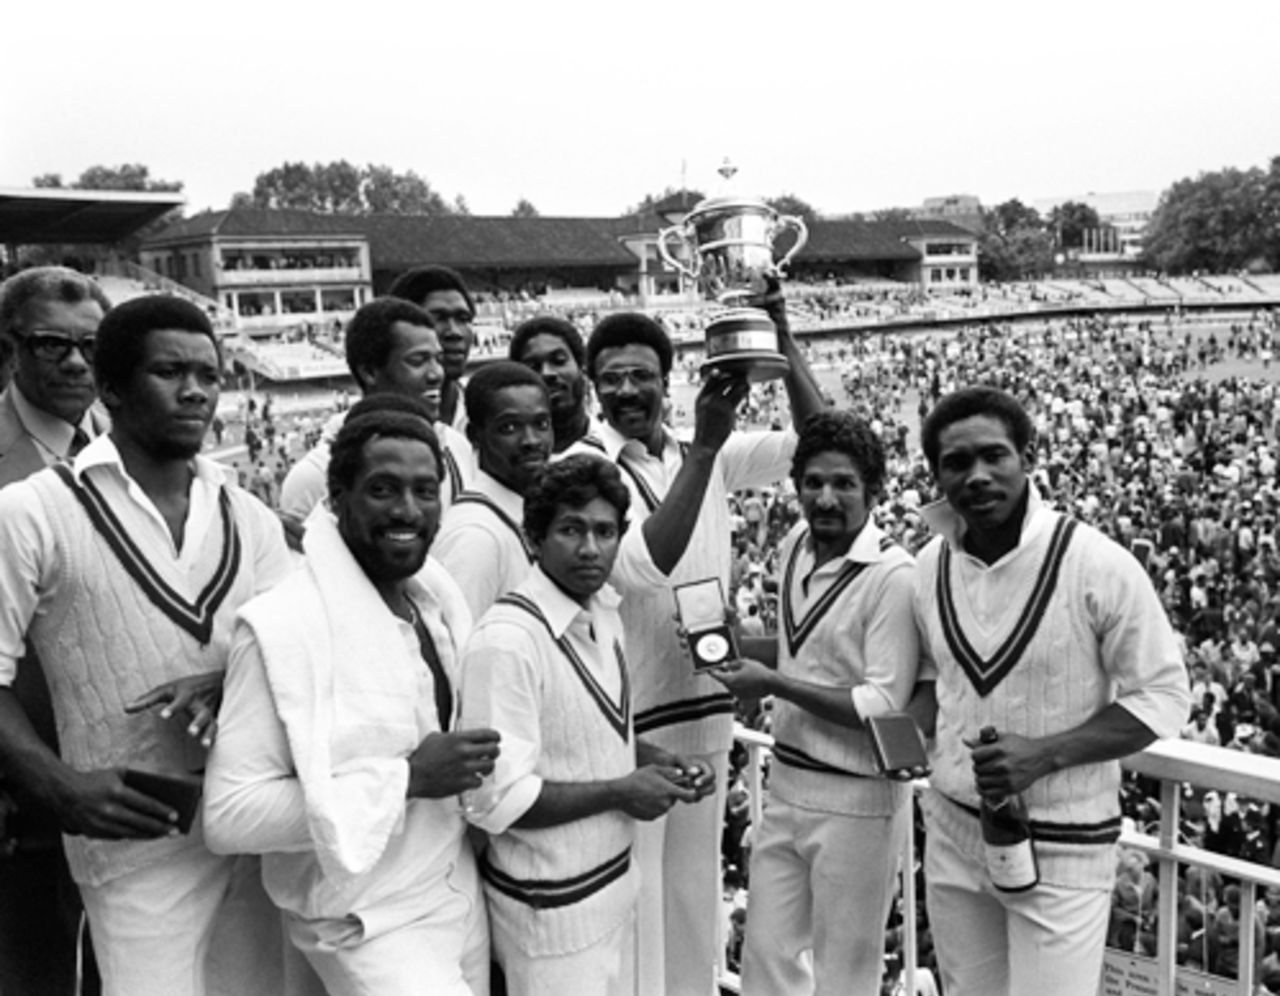 Clive Lloyd lifts the World Cup after West Indies had beaten England in the 1979 final, England v West Indies, Lord's, June 23, 1979